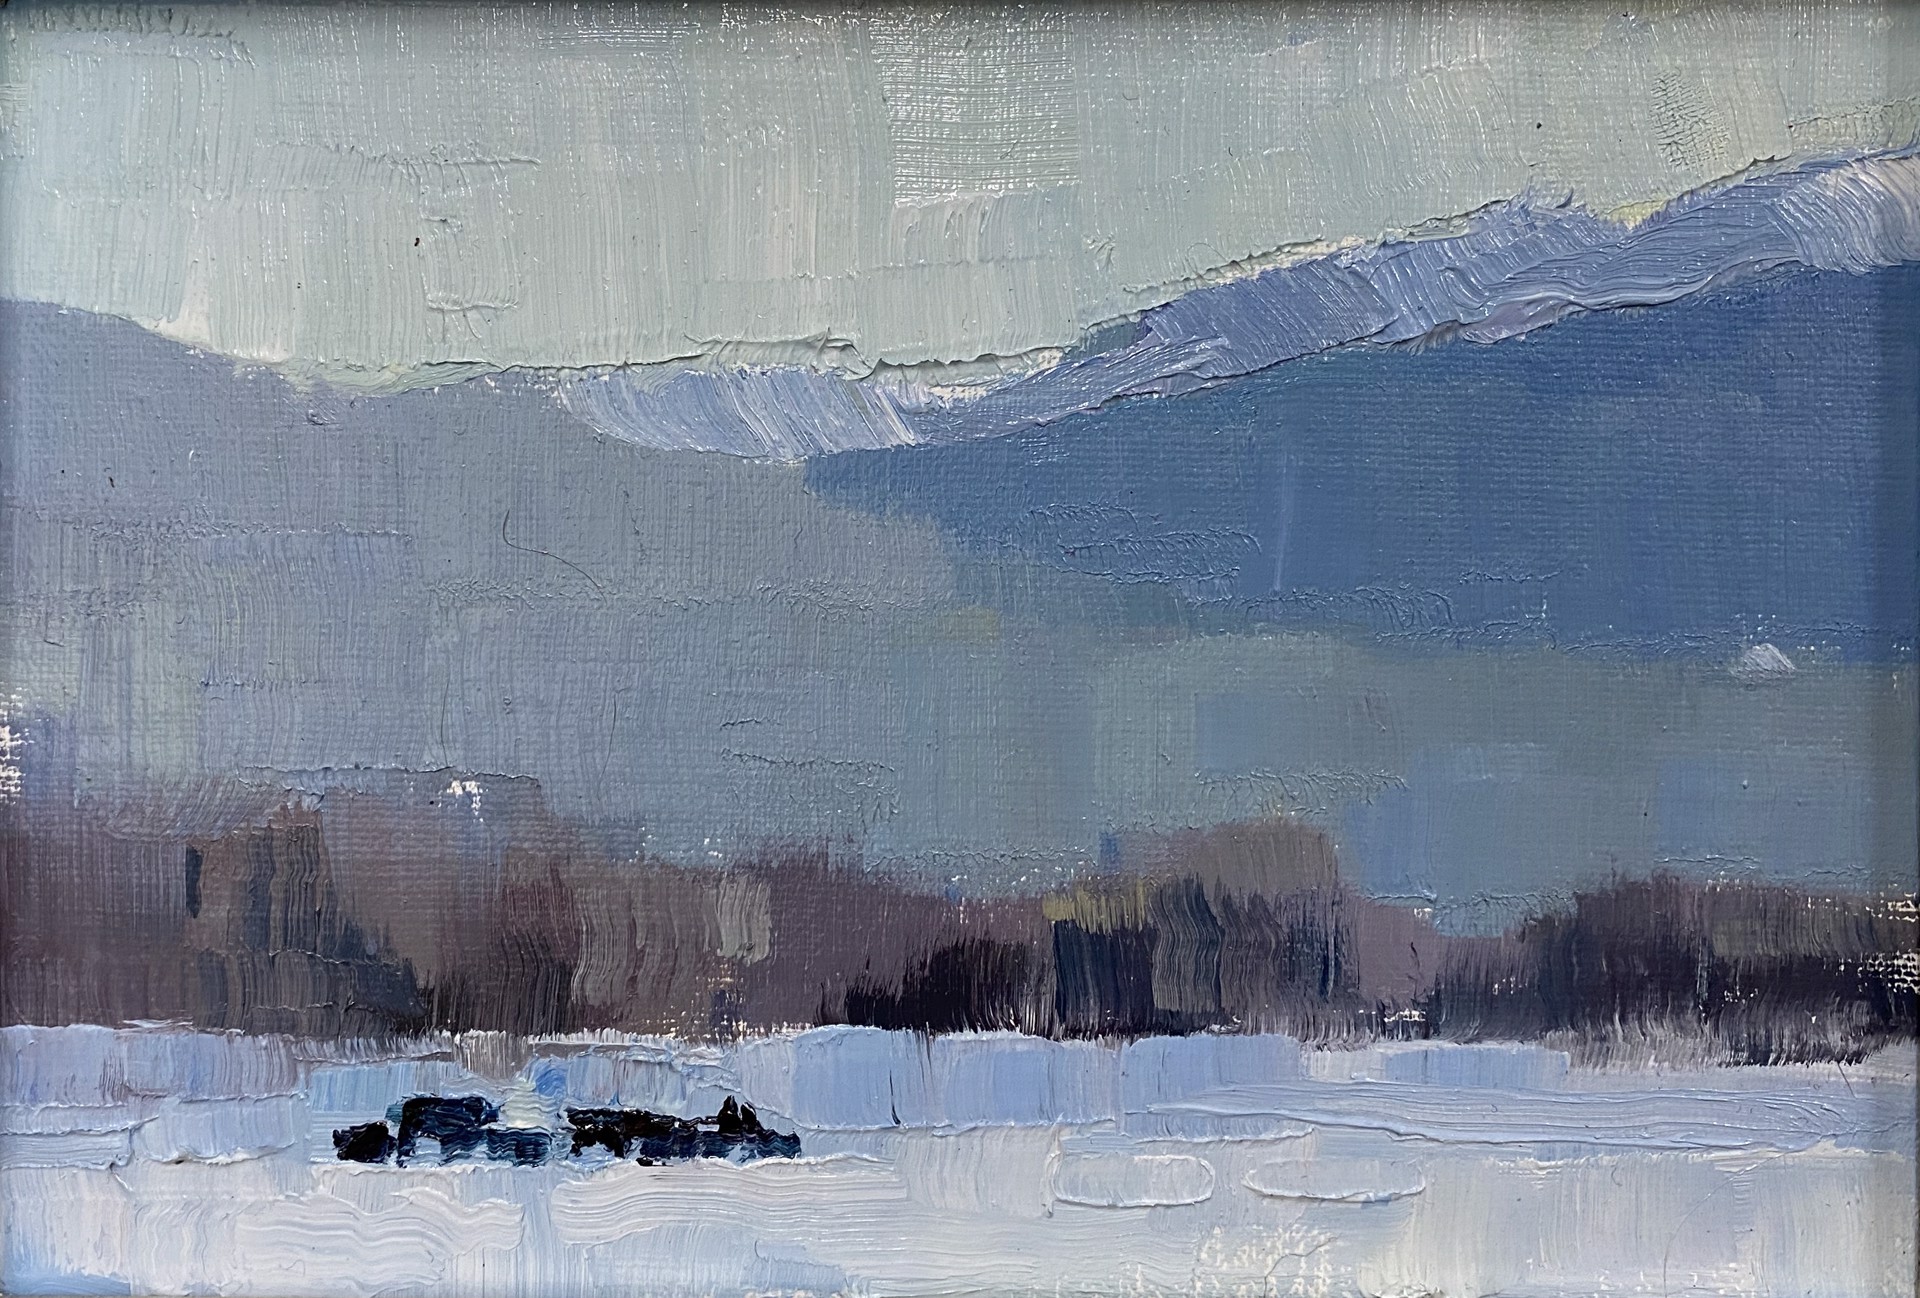 An Original Oil Painting Of A Snowy Field With Cattle And Mountains In The Distance, By Amber Blazina 